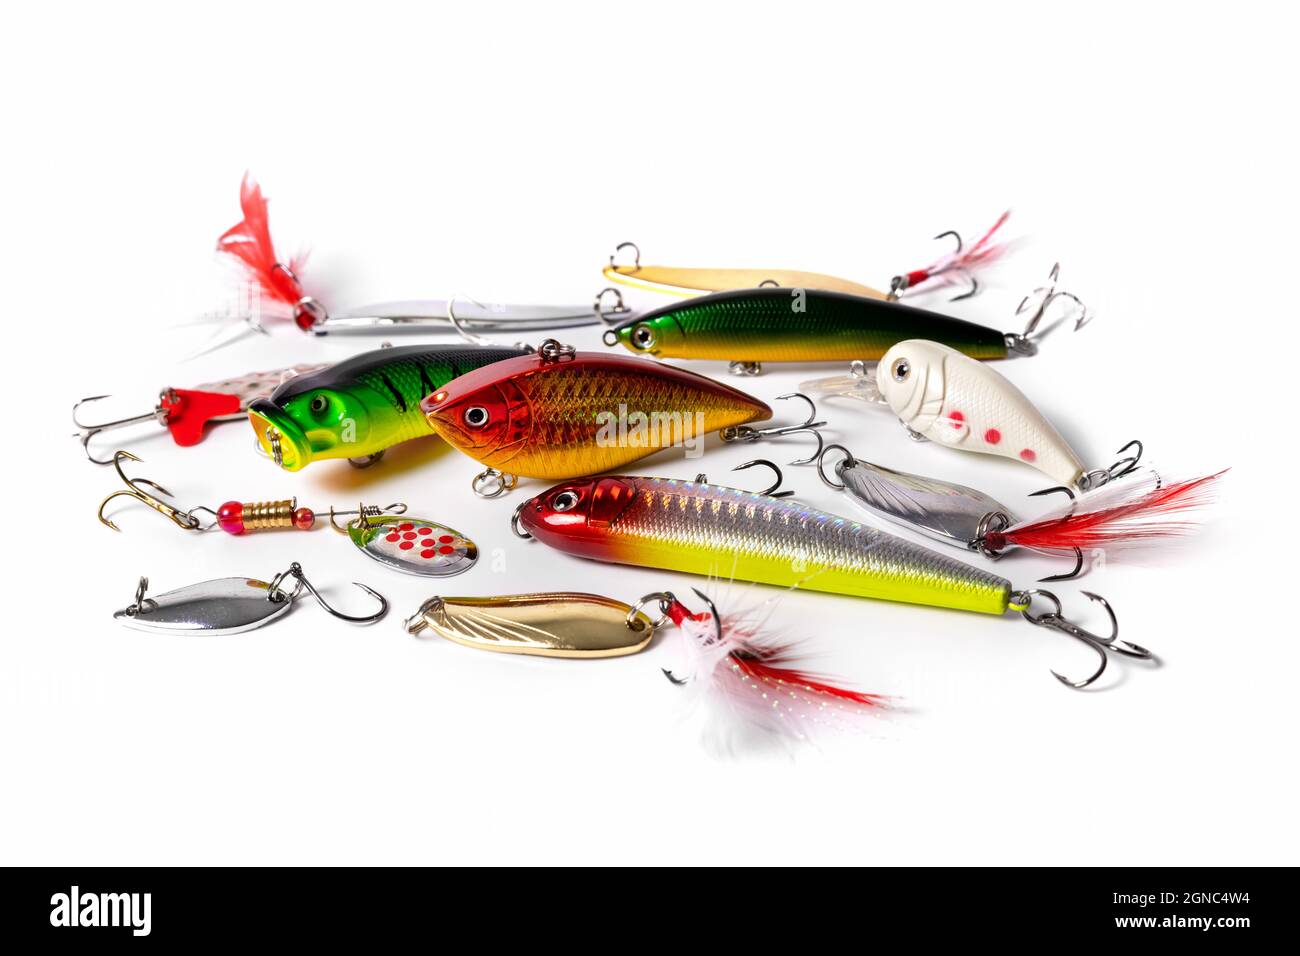 Spoon lures Cut Out Stock Images & Pictures - Alamy